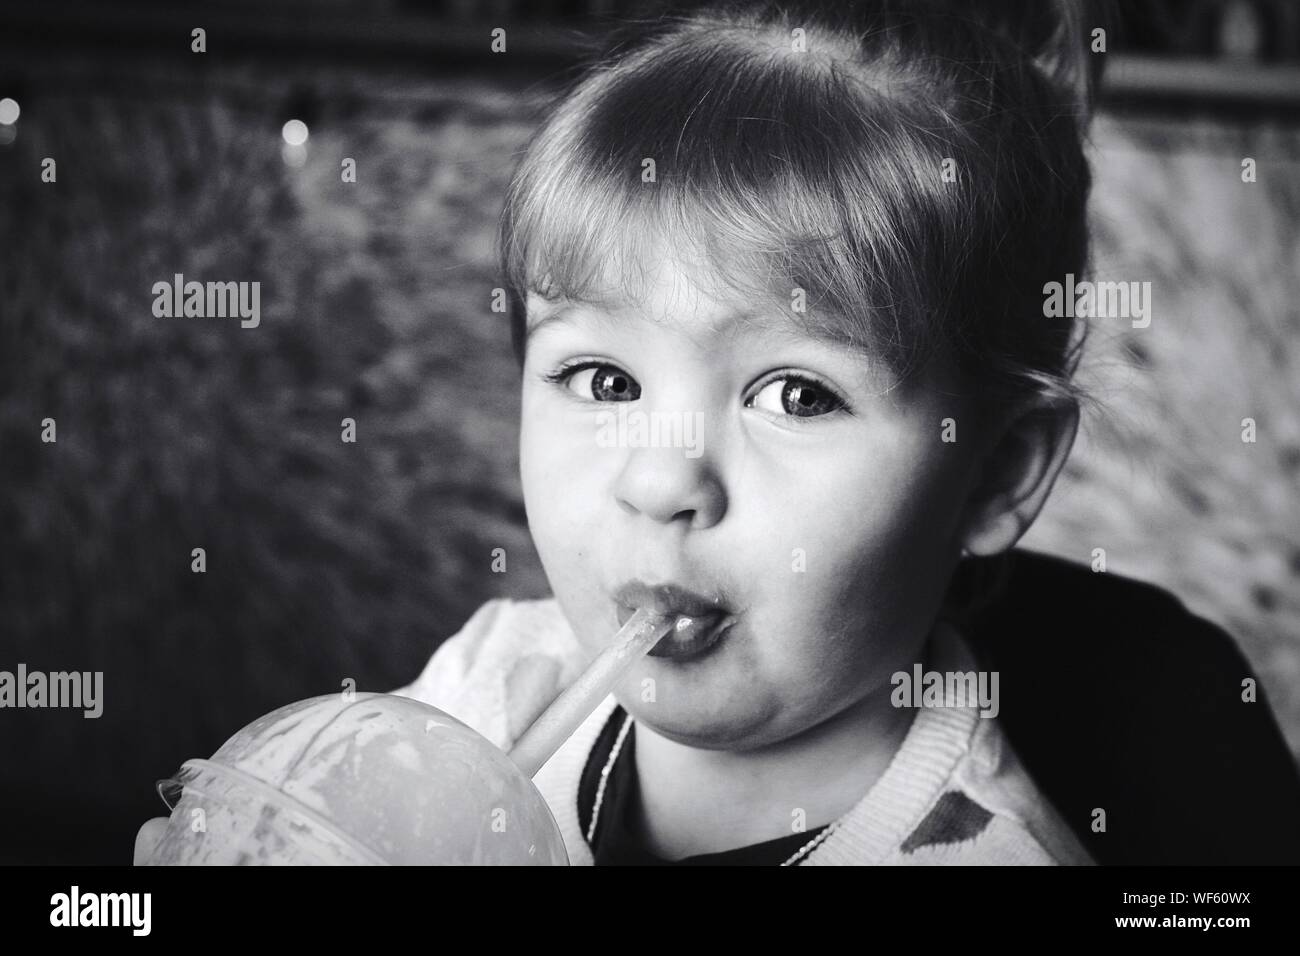 Close-up Portrait Of Girl Sipping Drink Stock Photo